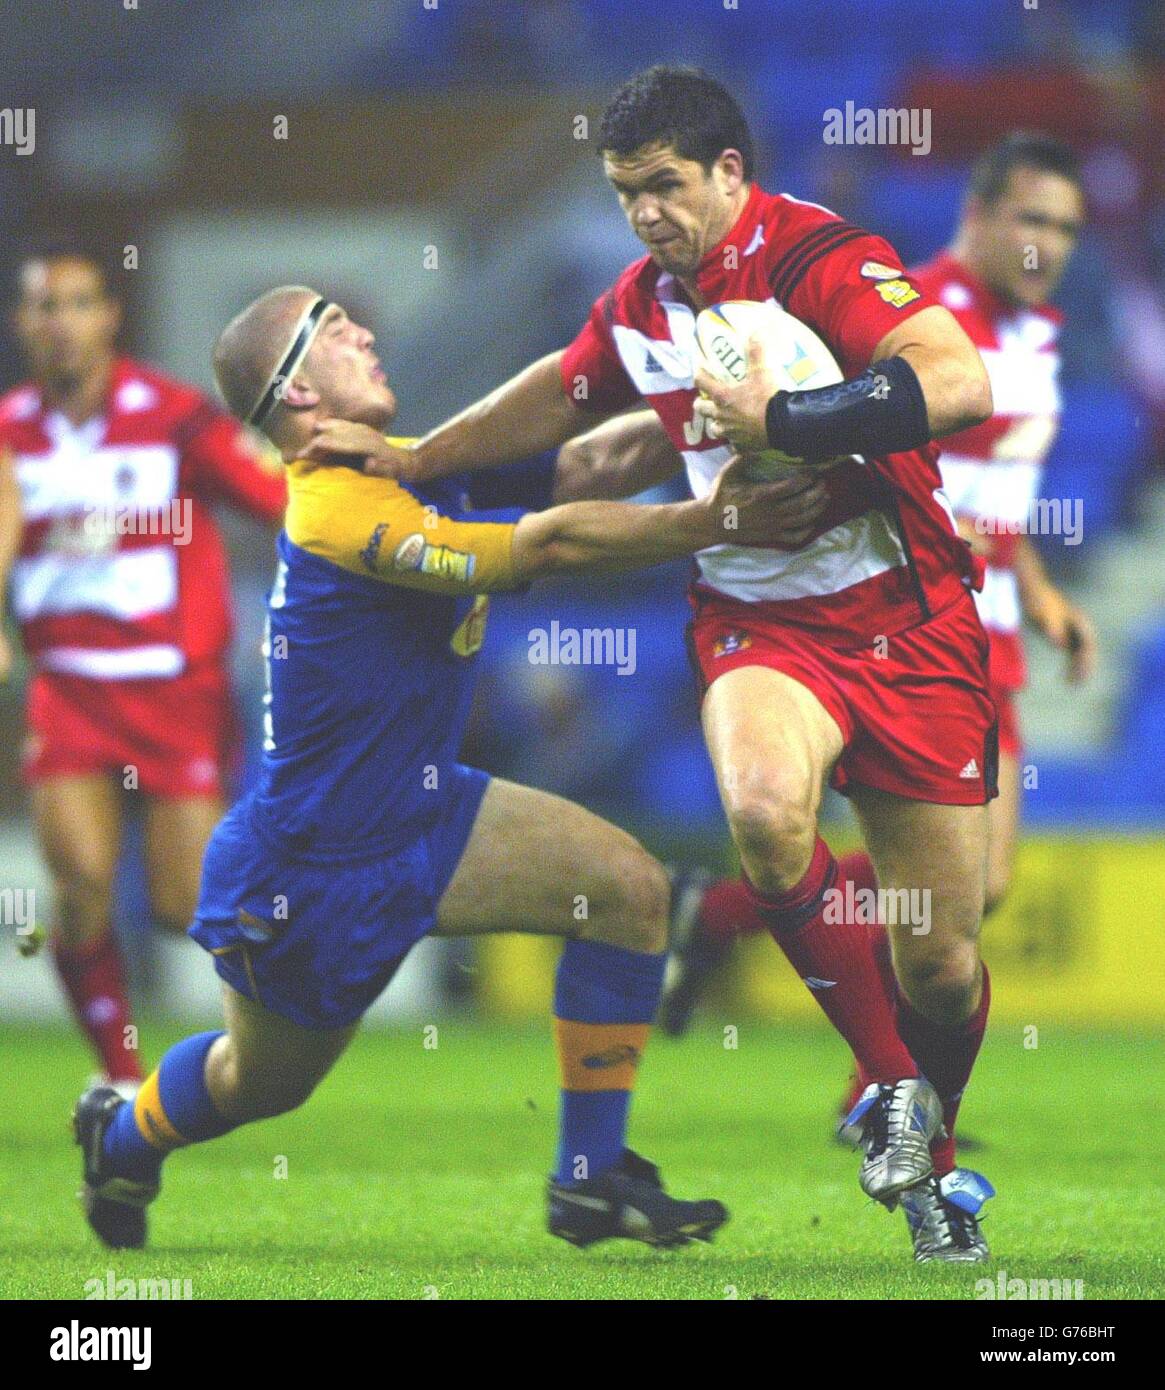 Wigan Warriors Andrew Farrell (right) holds off a tackle by Leeds Rhinos Matt Diskin, during the Tetleys Super League Semi-Final at the JJB Stadium in Wigan. Stock Photo